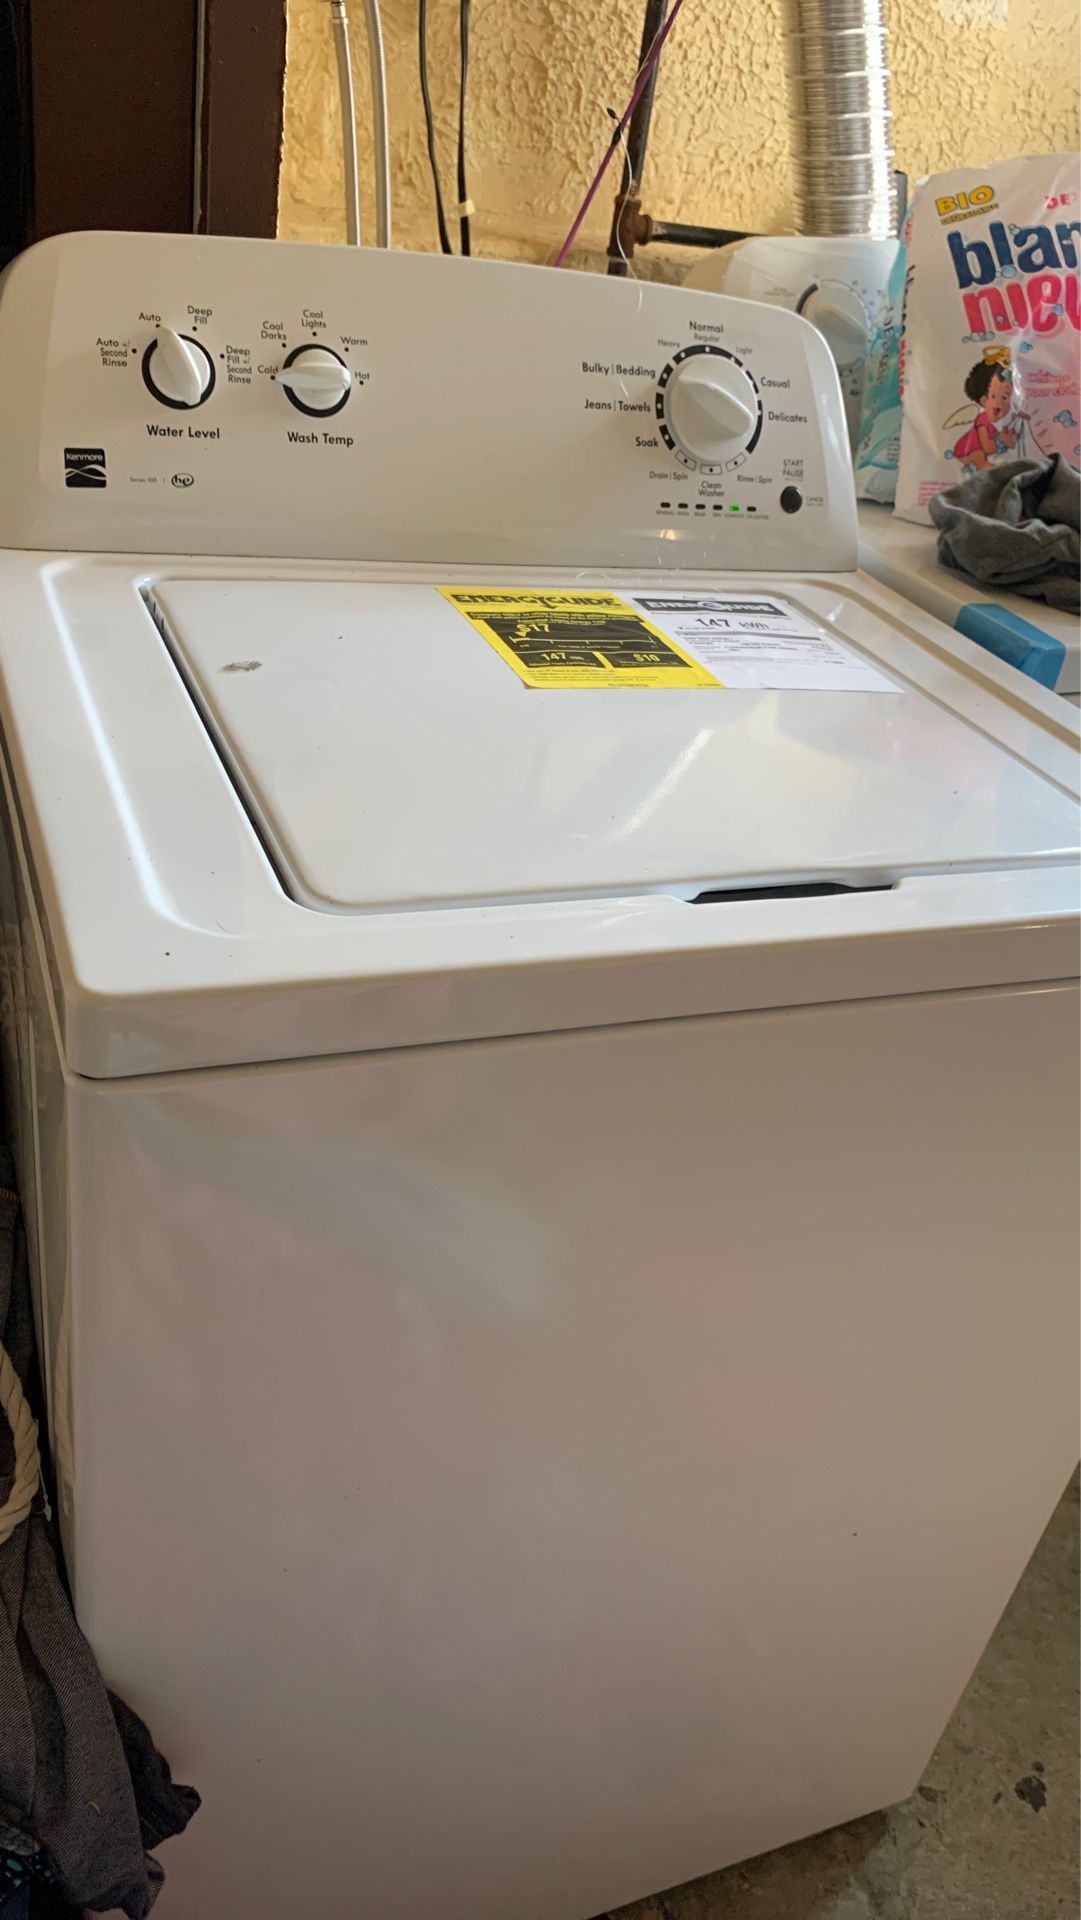 Washer and dryer both 600$$ I paid 1,435 $ buyer them 2 moths ago warranty for 3 years in sears outlet